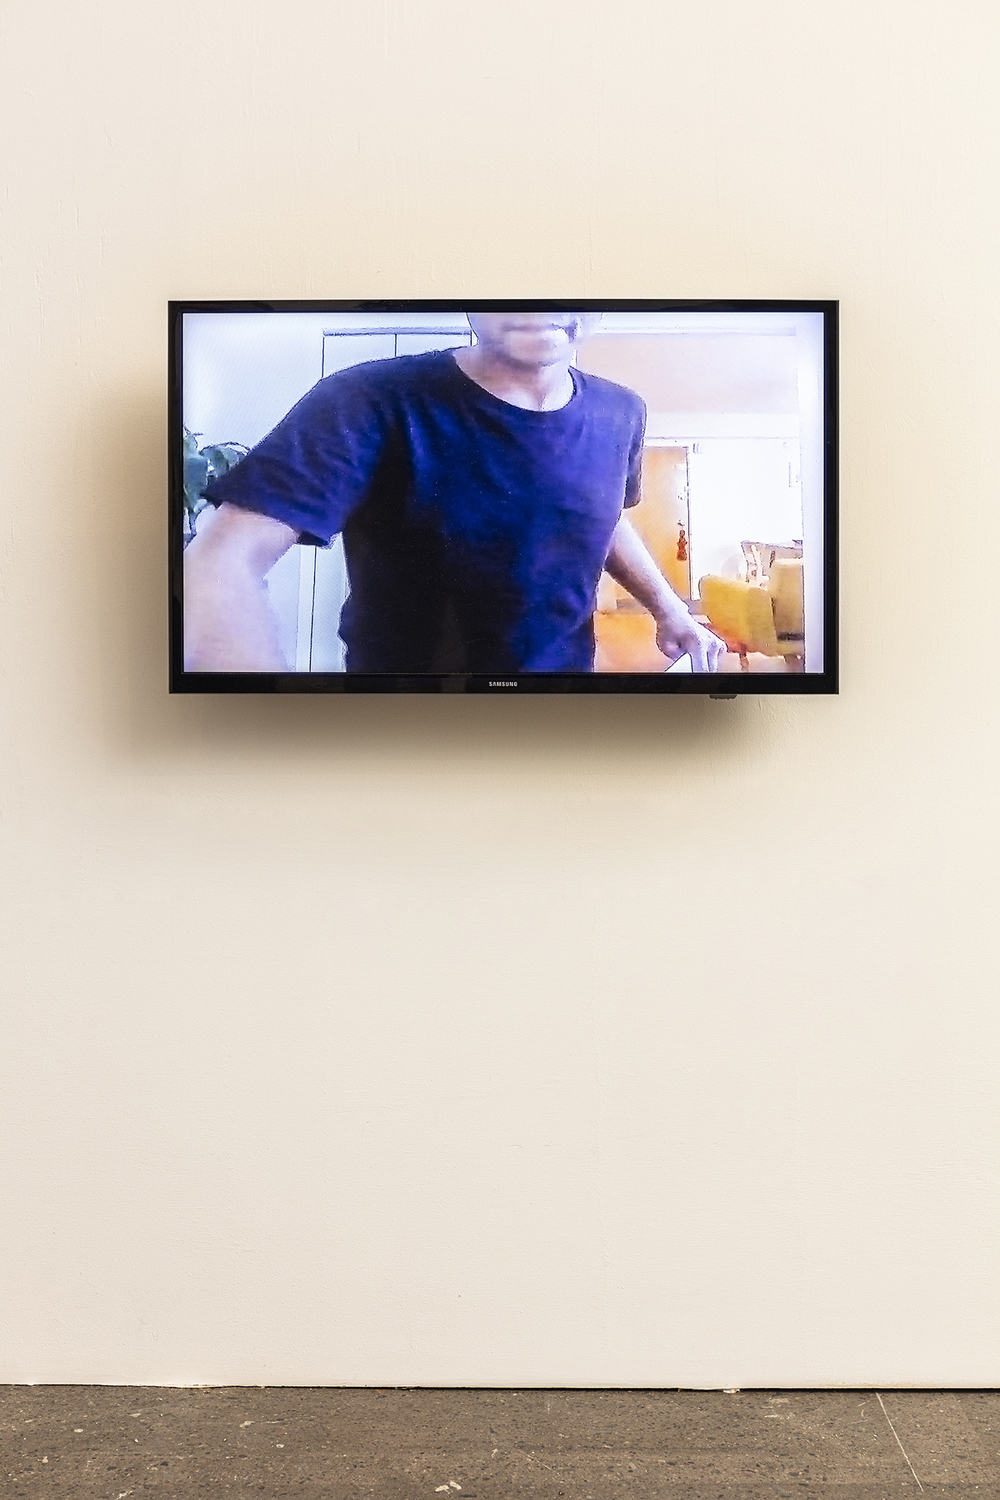 Image of man in black t-shirt on tv